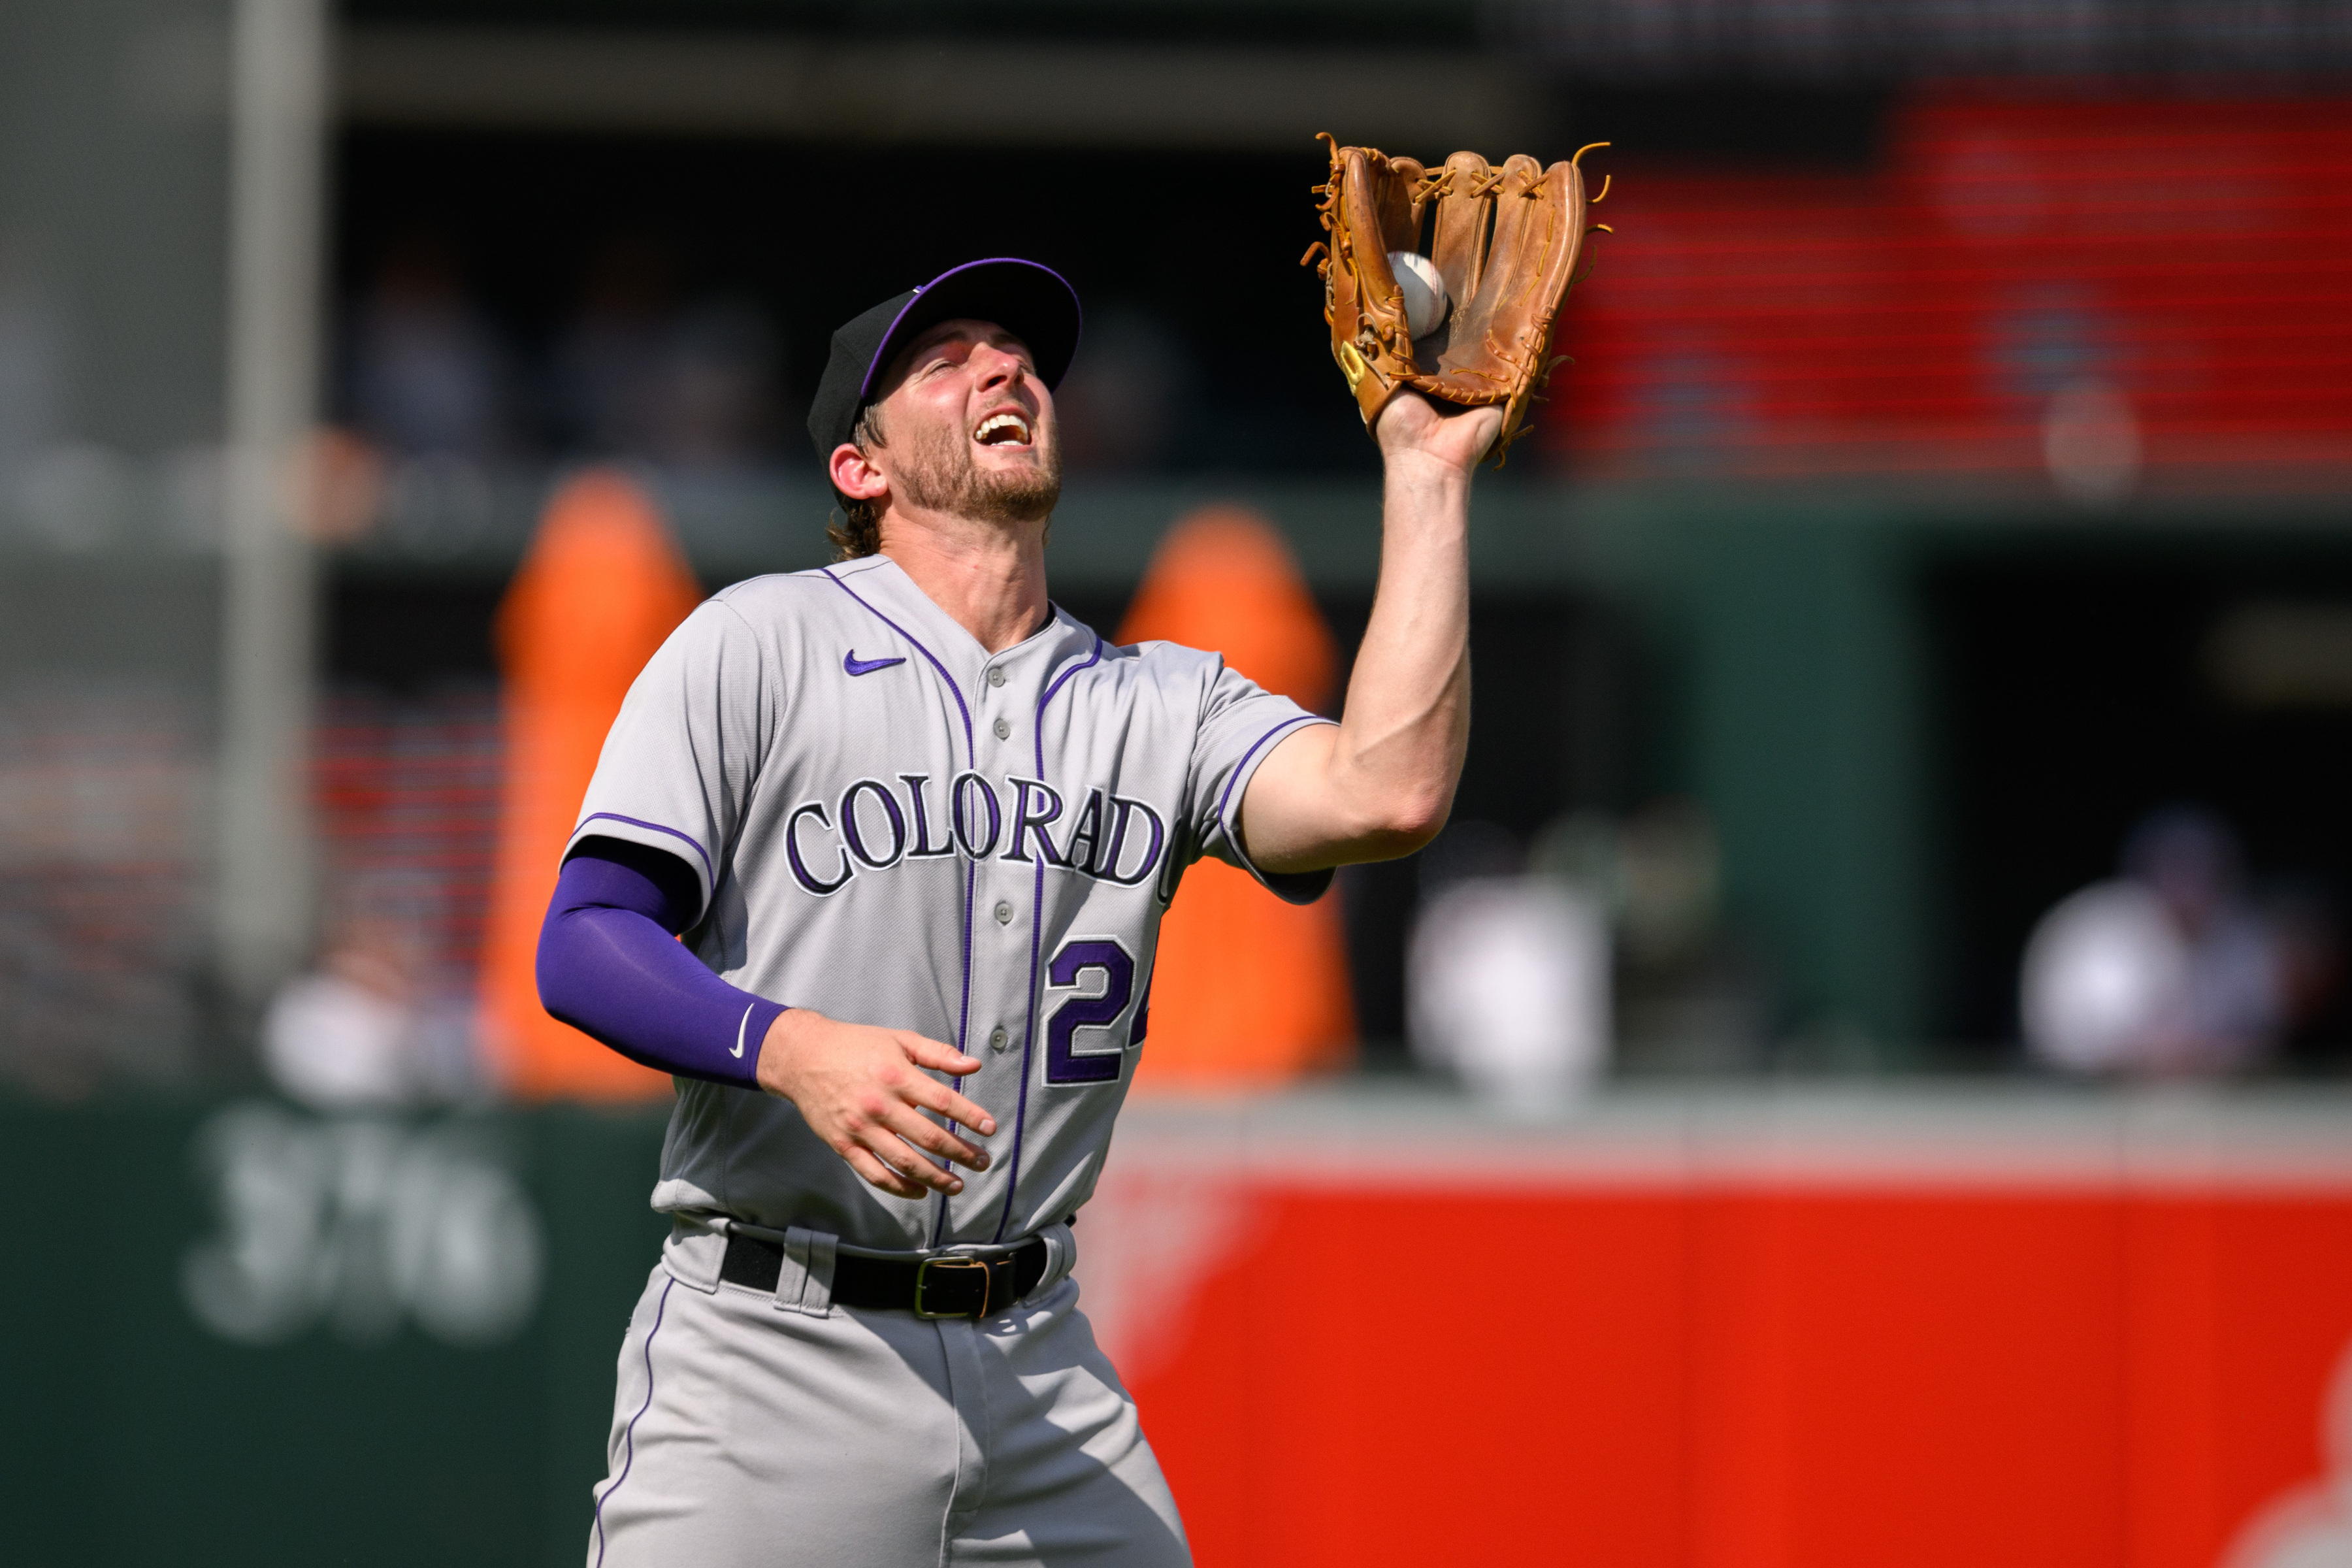 Two disastrous innings unravel the Colorado Rockies in blowout